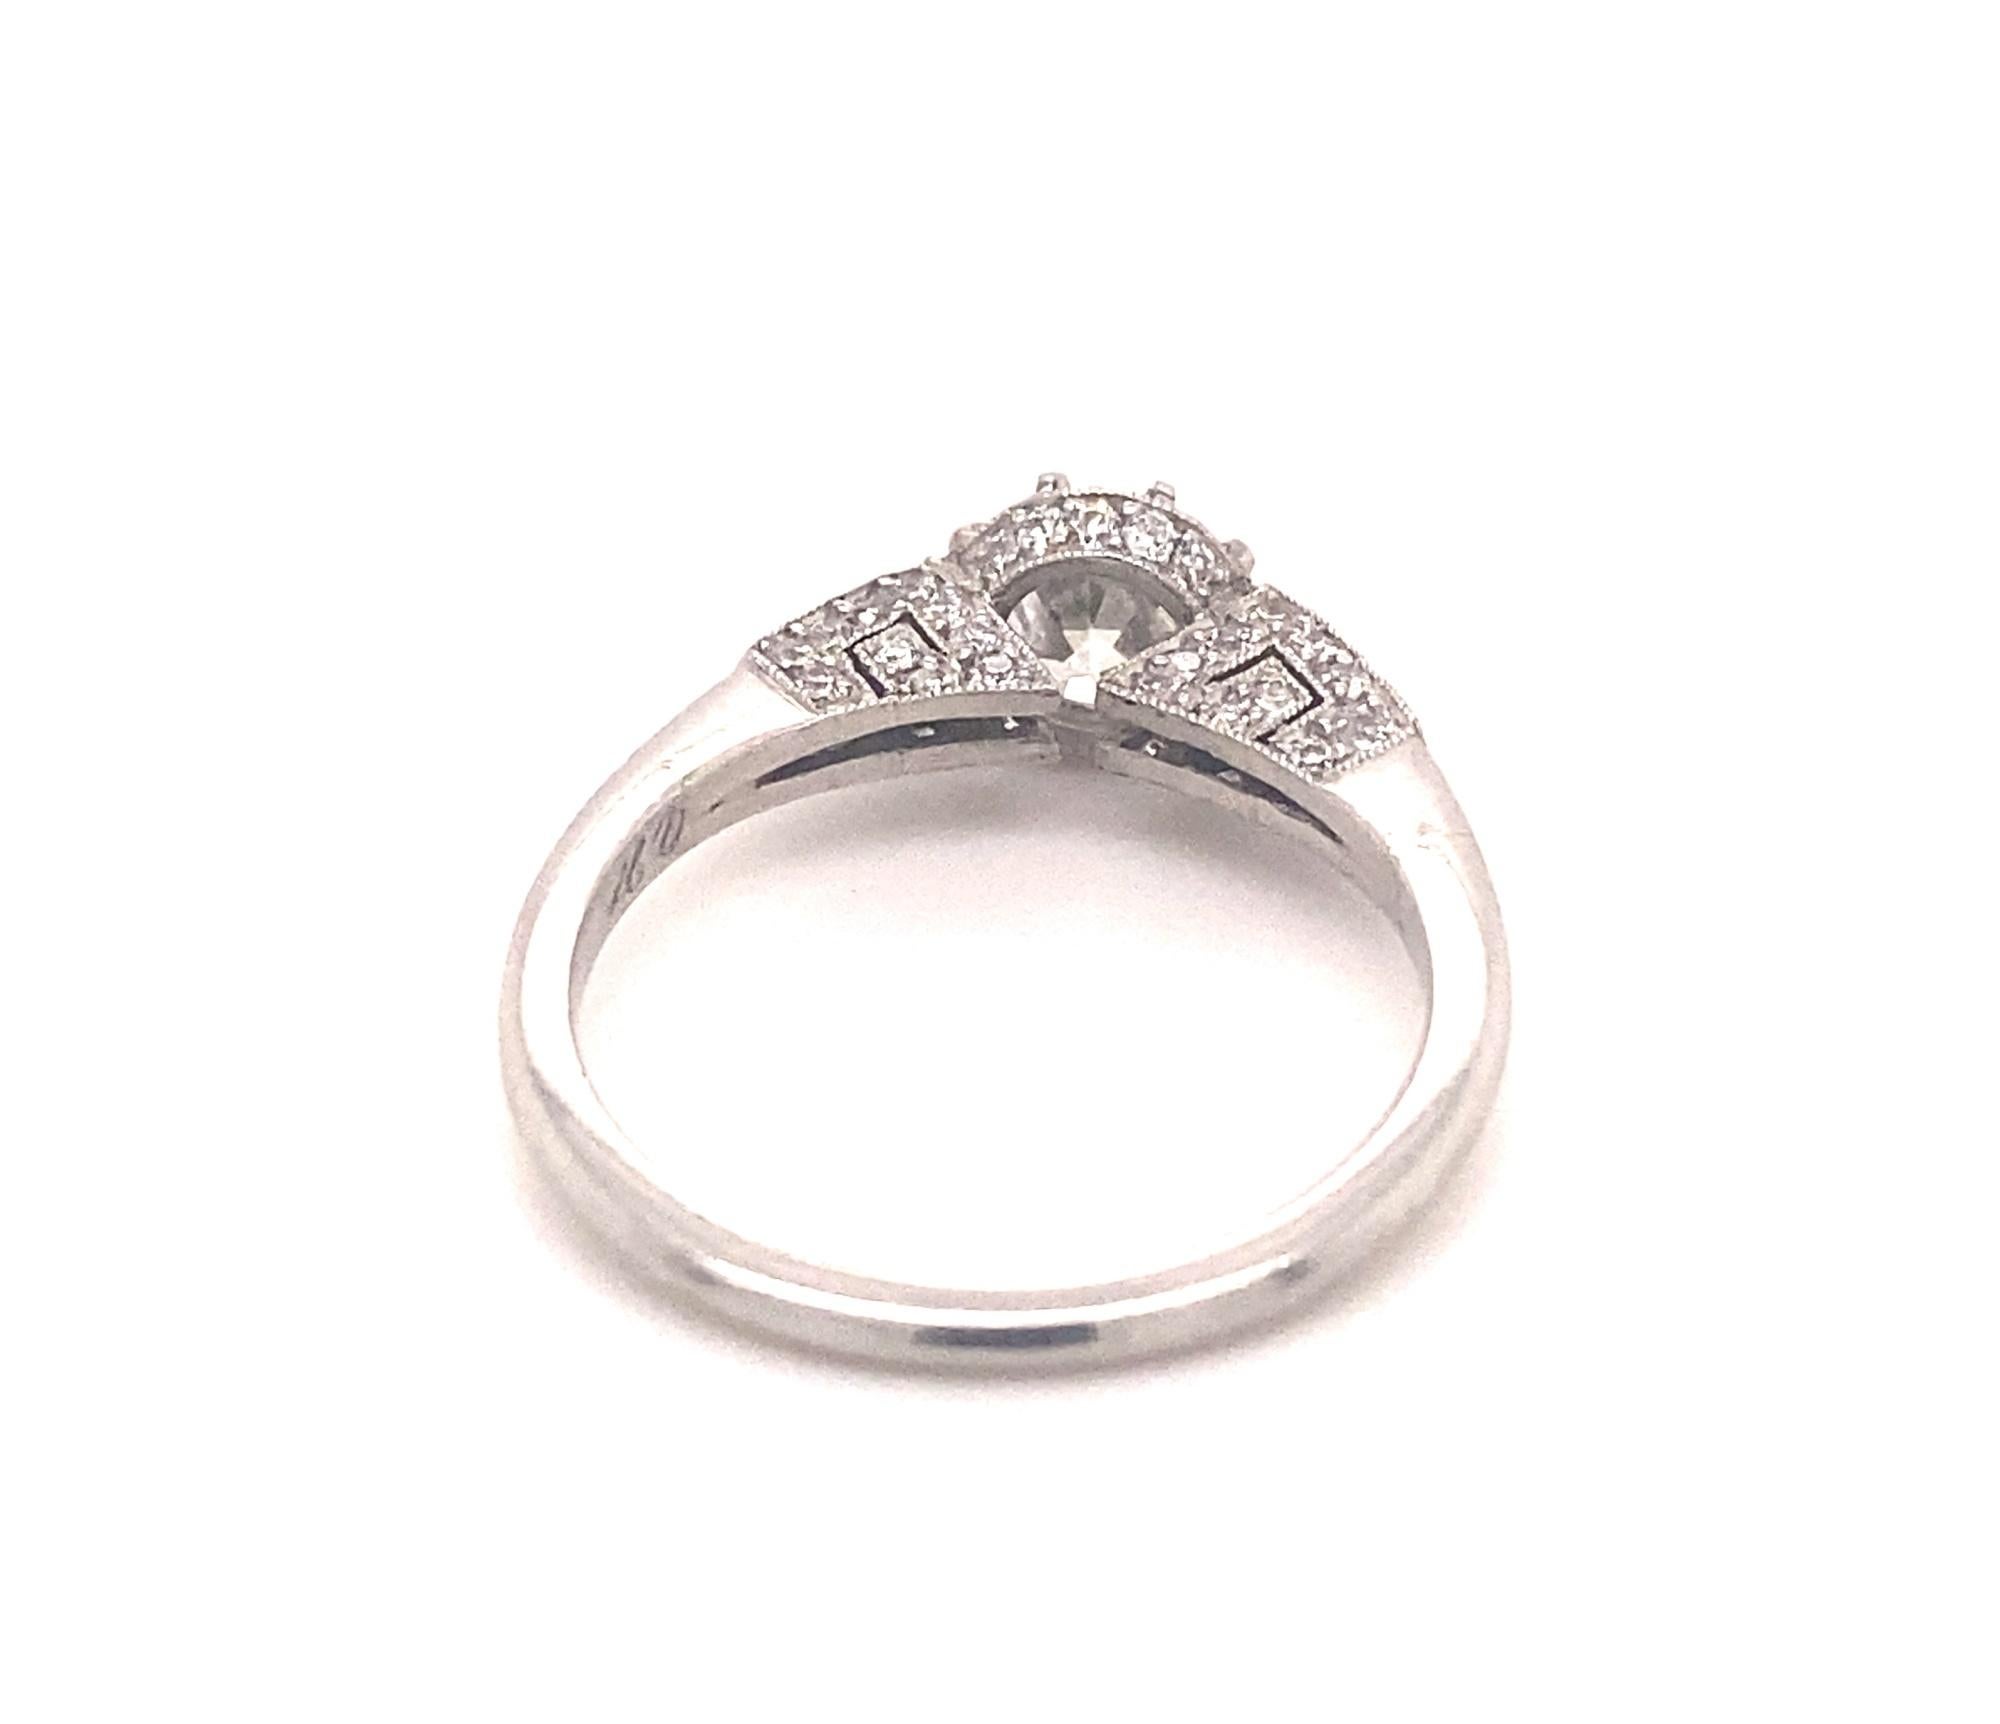 This is a beautiful vintage engagement ring set with a .91 transitional cut diamond.  The setting has an intricate design with 56 pave diamonds I color VS-2 clarity total diamond weight 1.47 carats.  The center diamond is H-I color SI-1 clarity. 